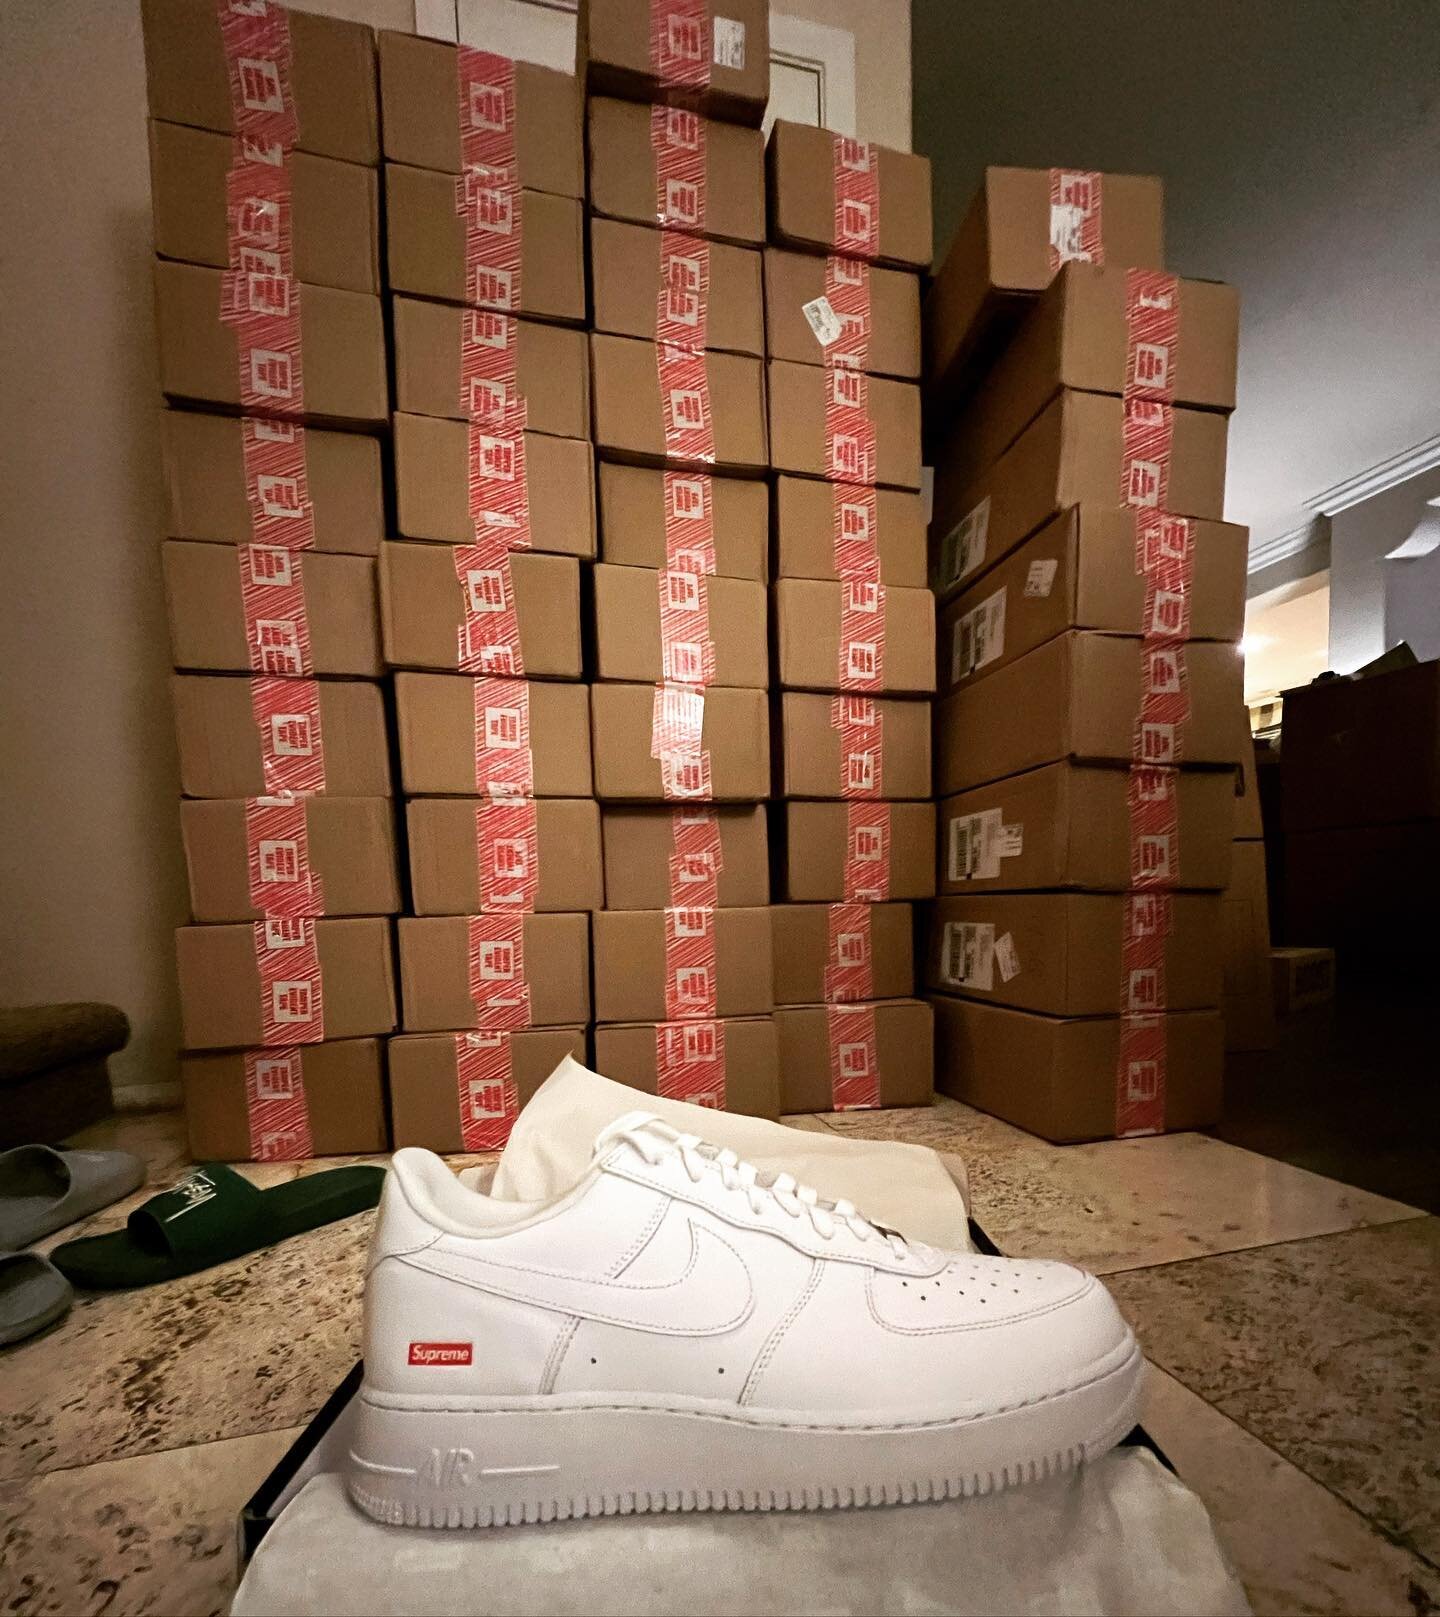 Supreme x Af1 last restock, hopefully they don&rsquo;t release these anymore.